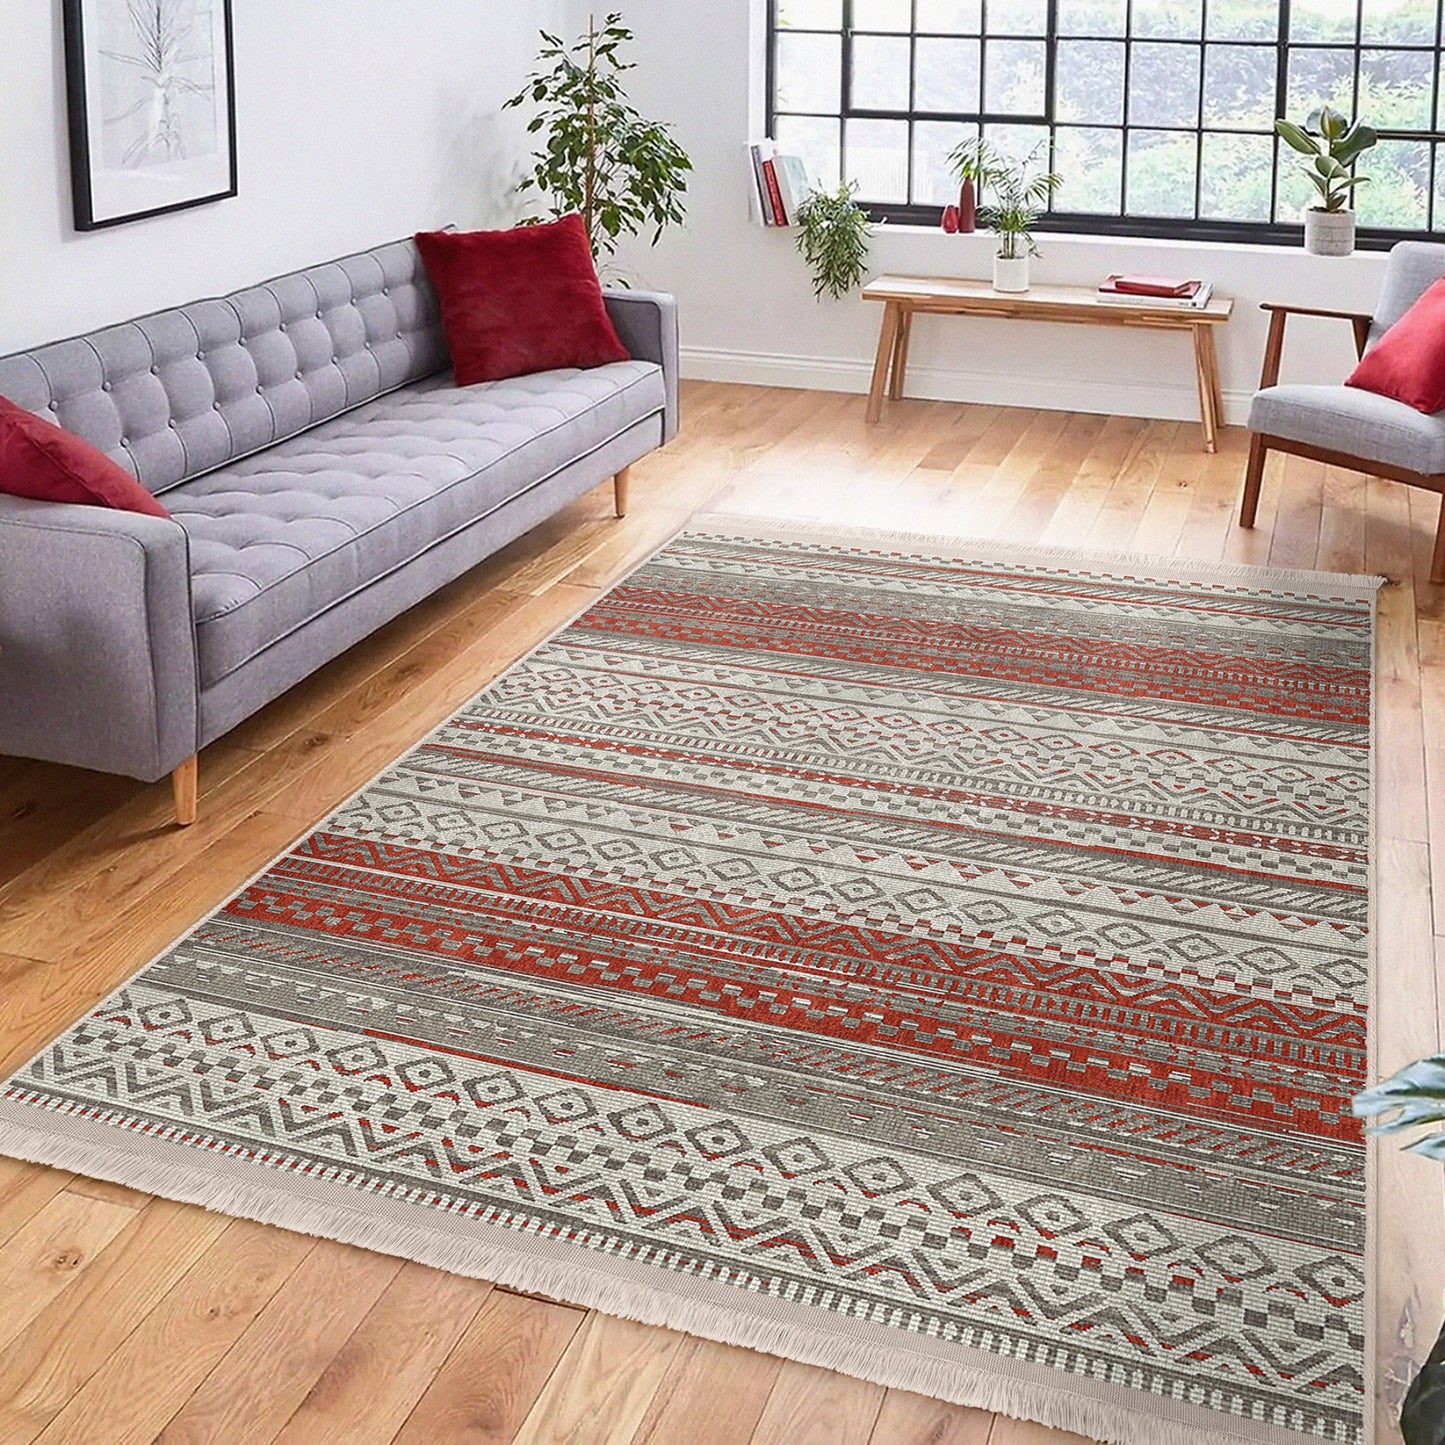 High-Quality Moroccan Area Rug for Modern Decor